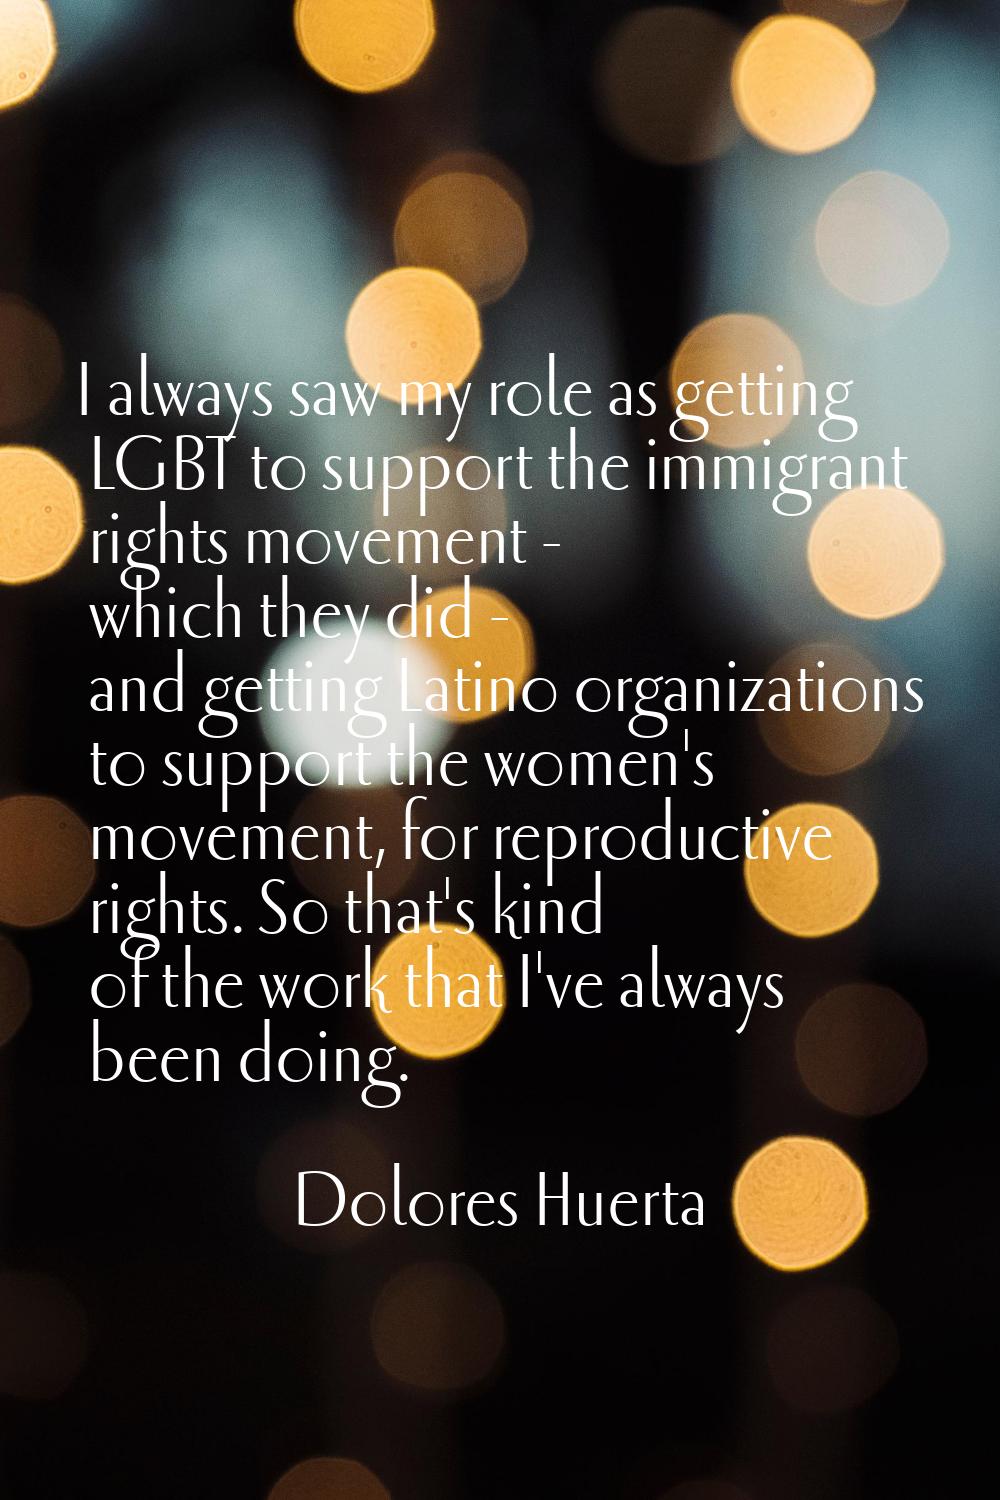 I always saw my role as getting LGBT to support the immigrant rights movement - which they did - an